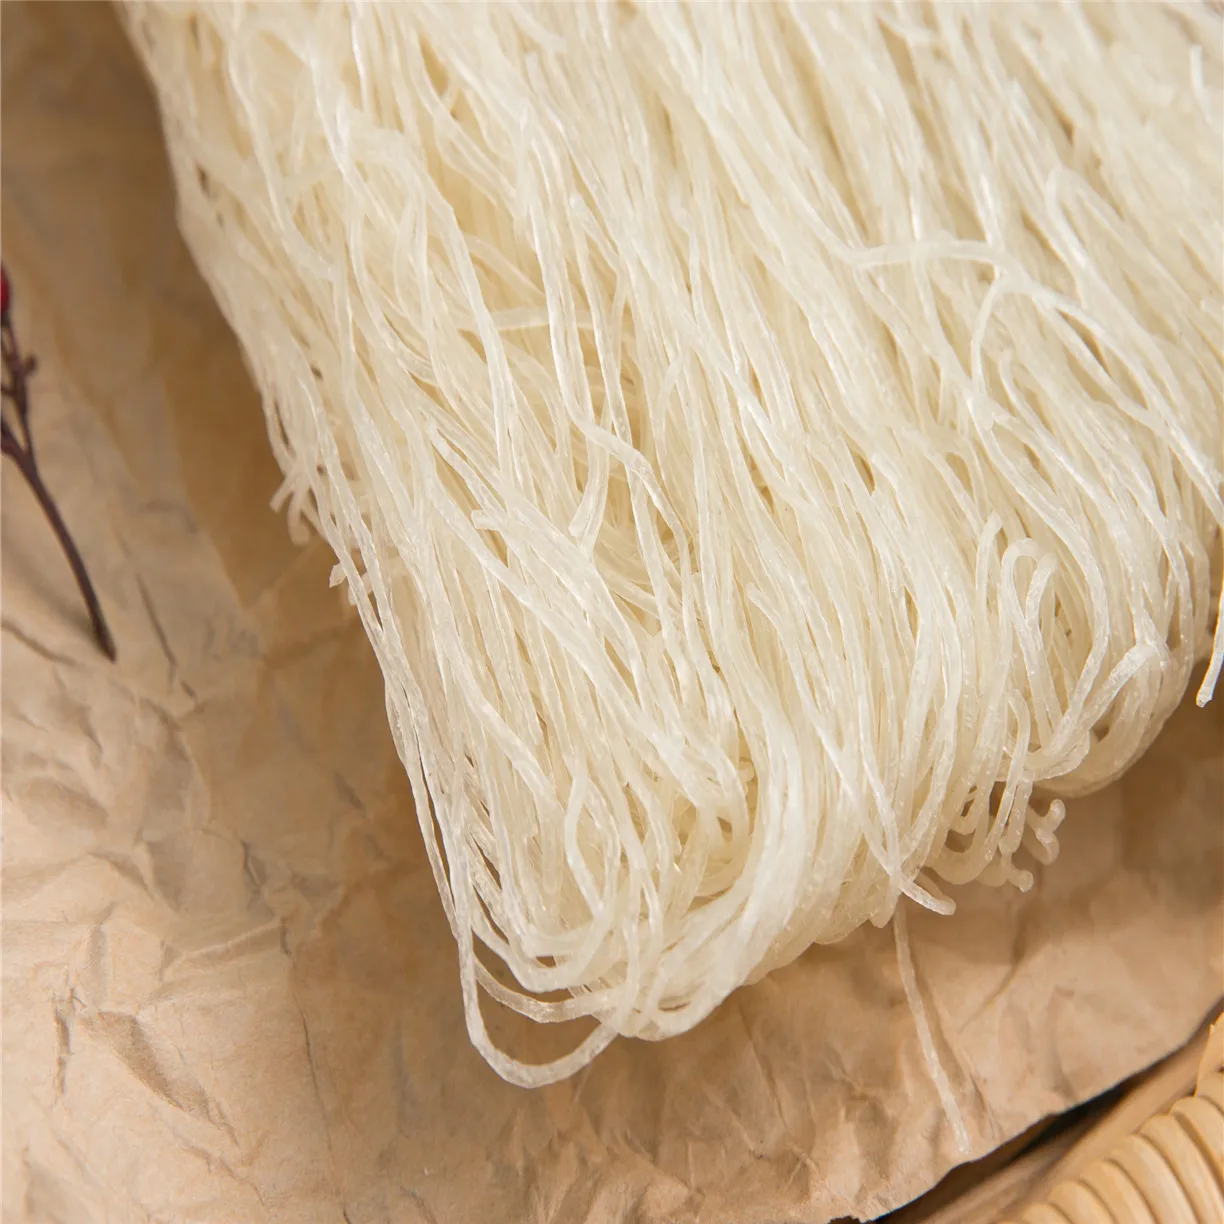 
chinese organic and gluten free rice noodles bulk 